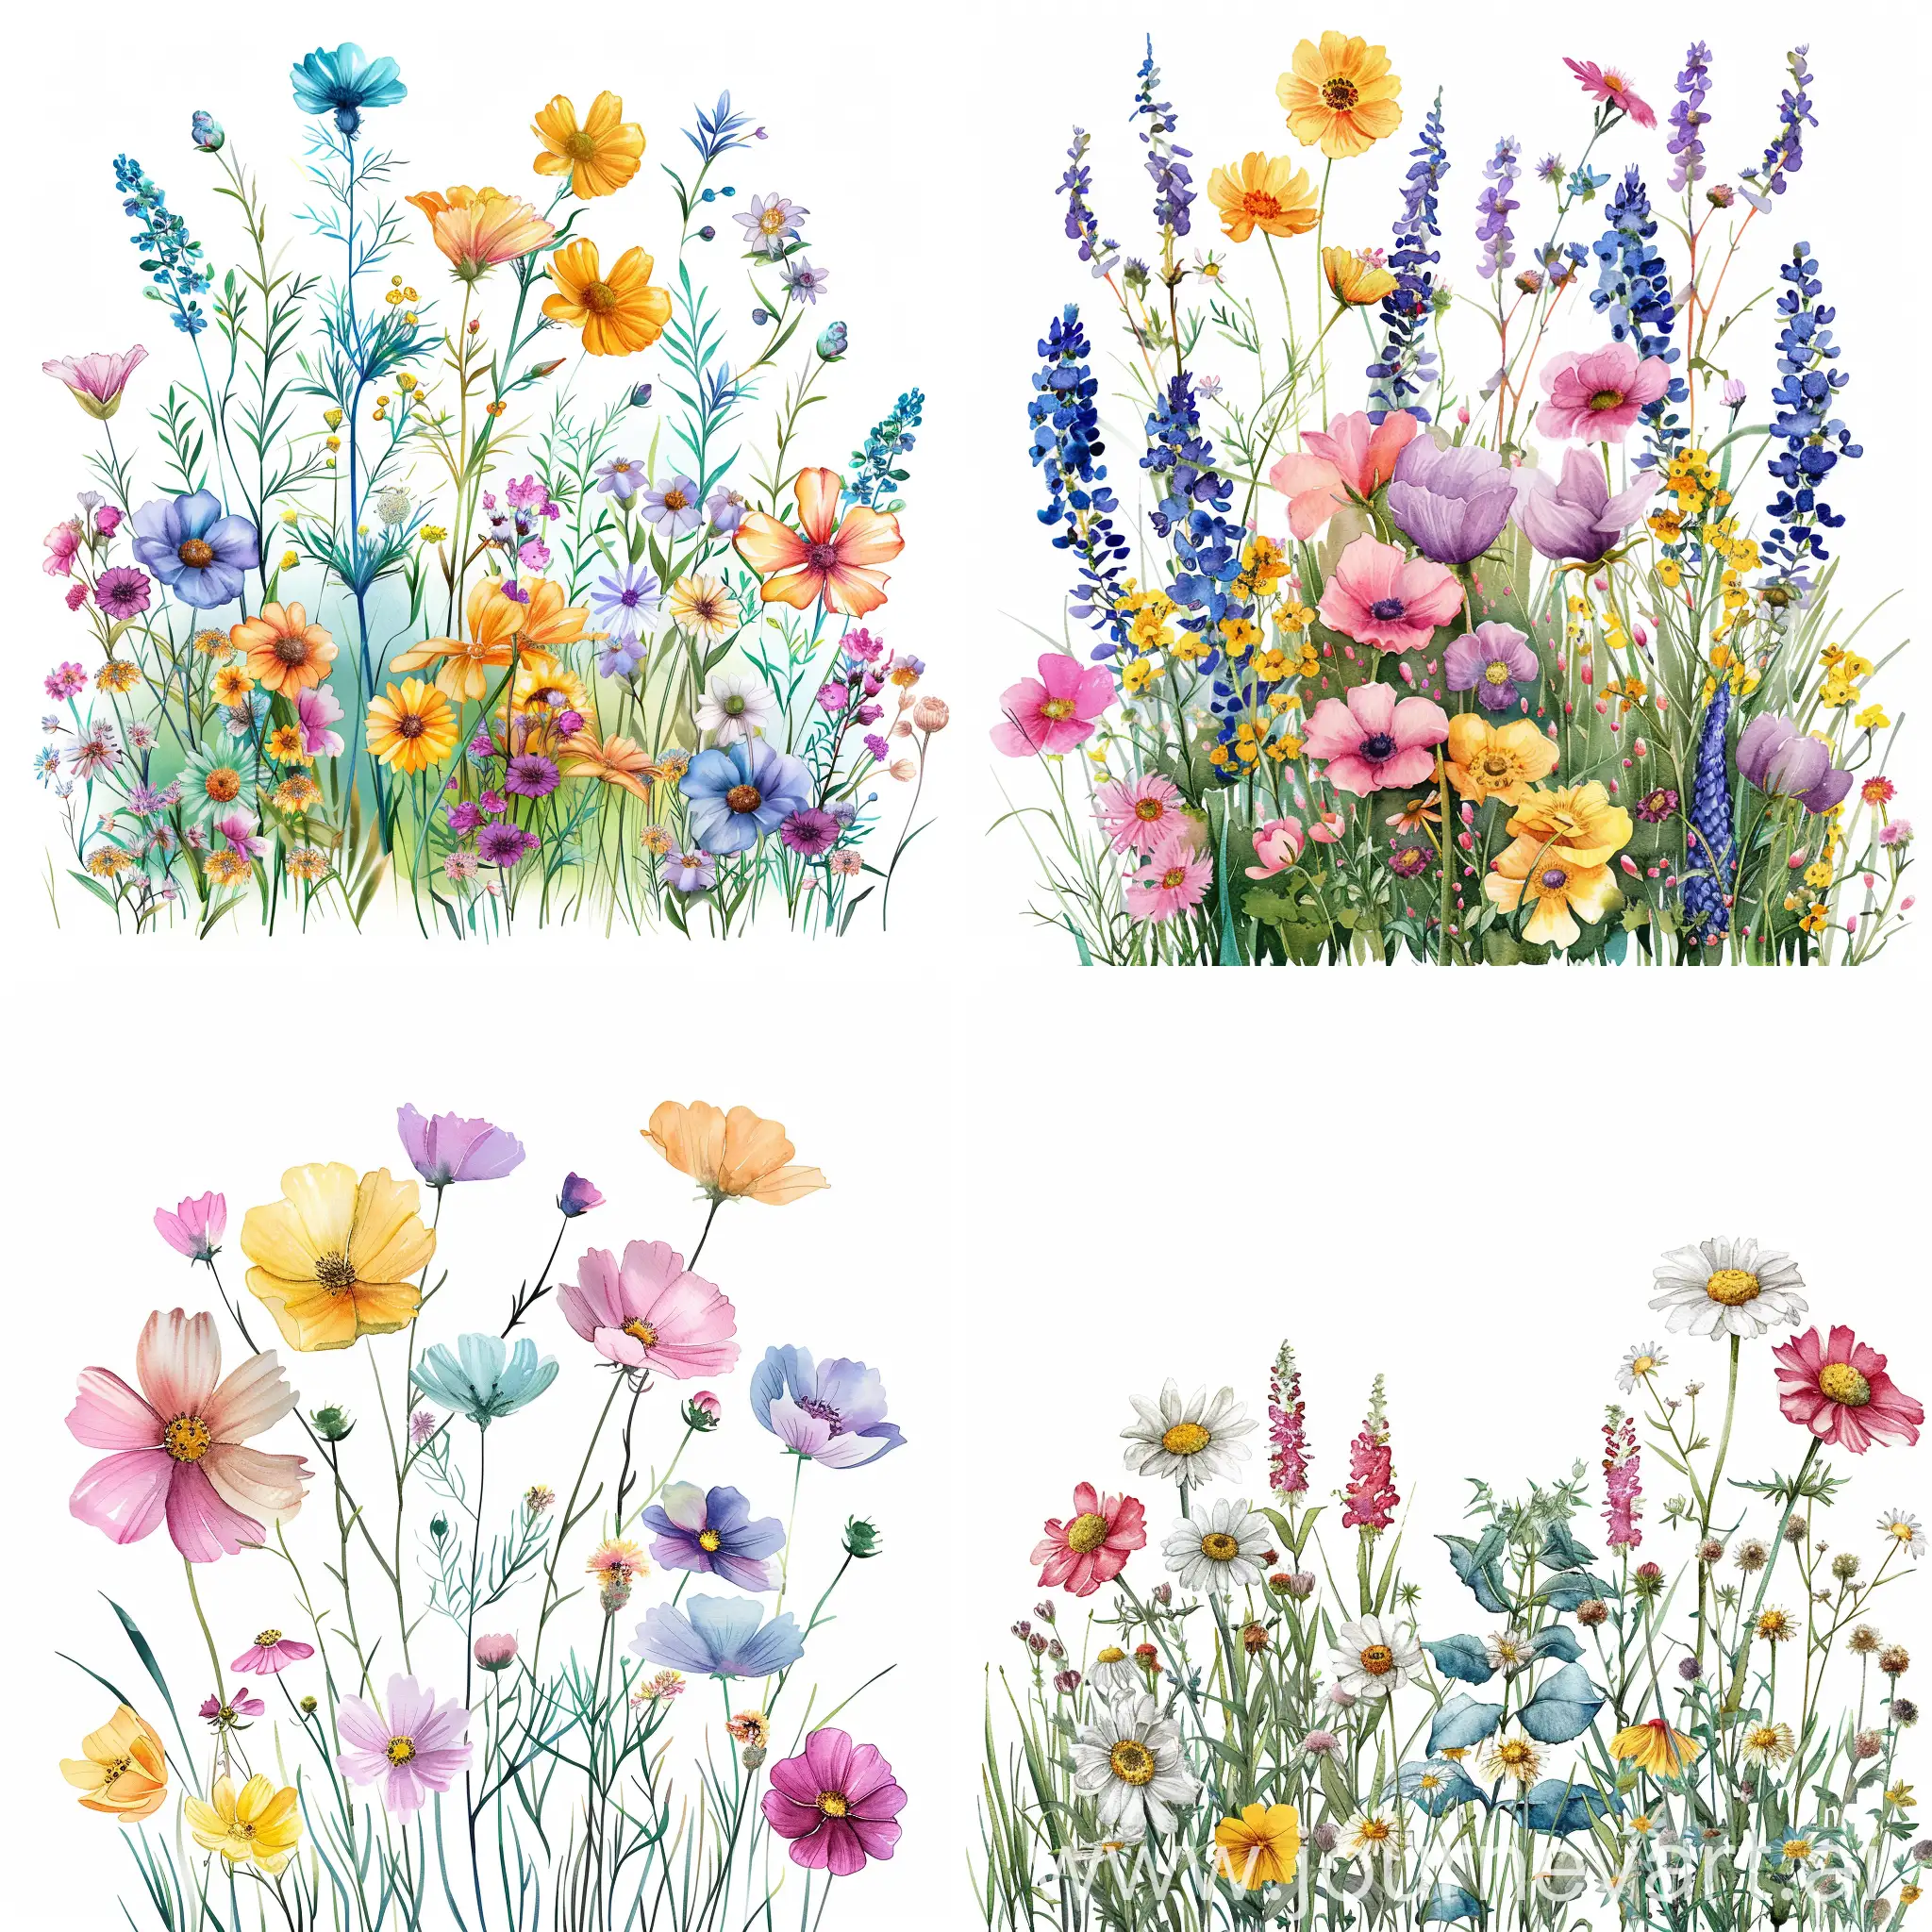 Meadow Style flowers with a watercolor style, on a white background, high quality details